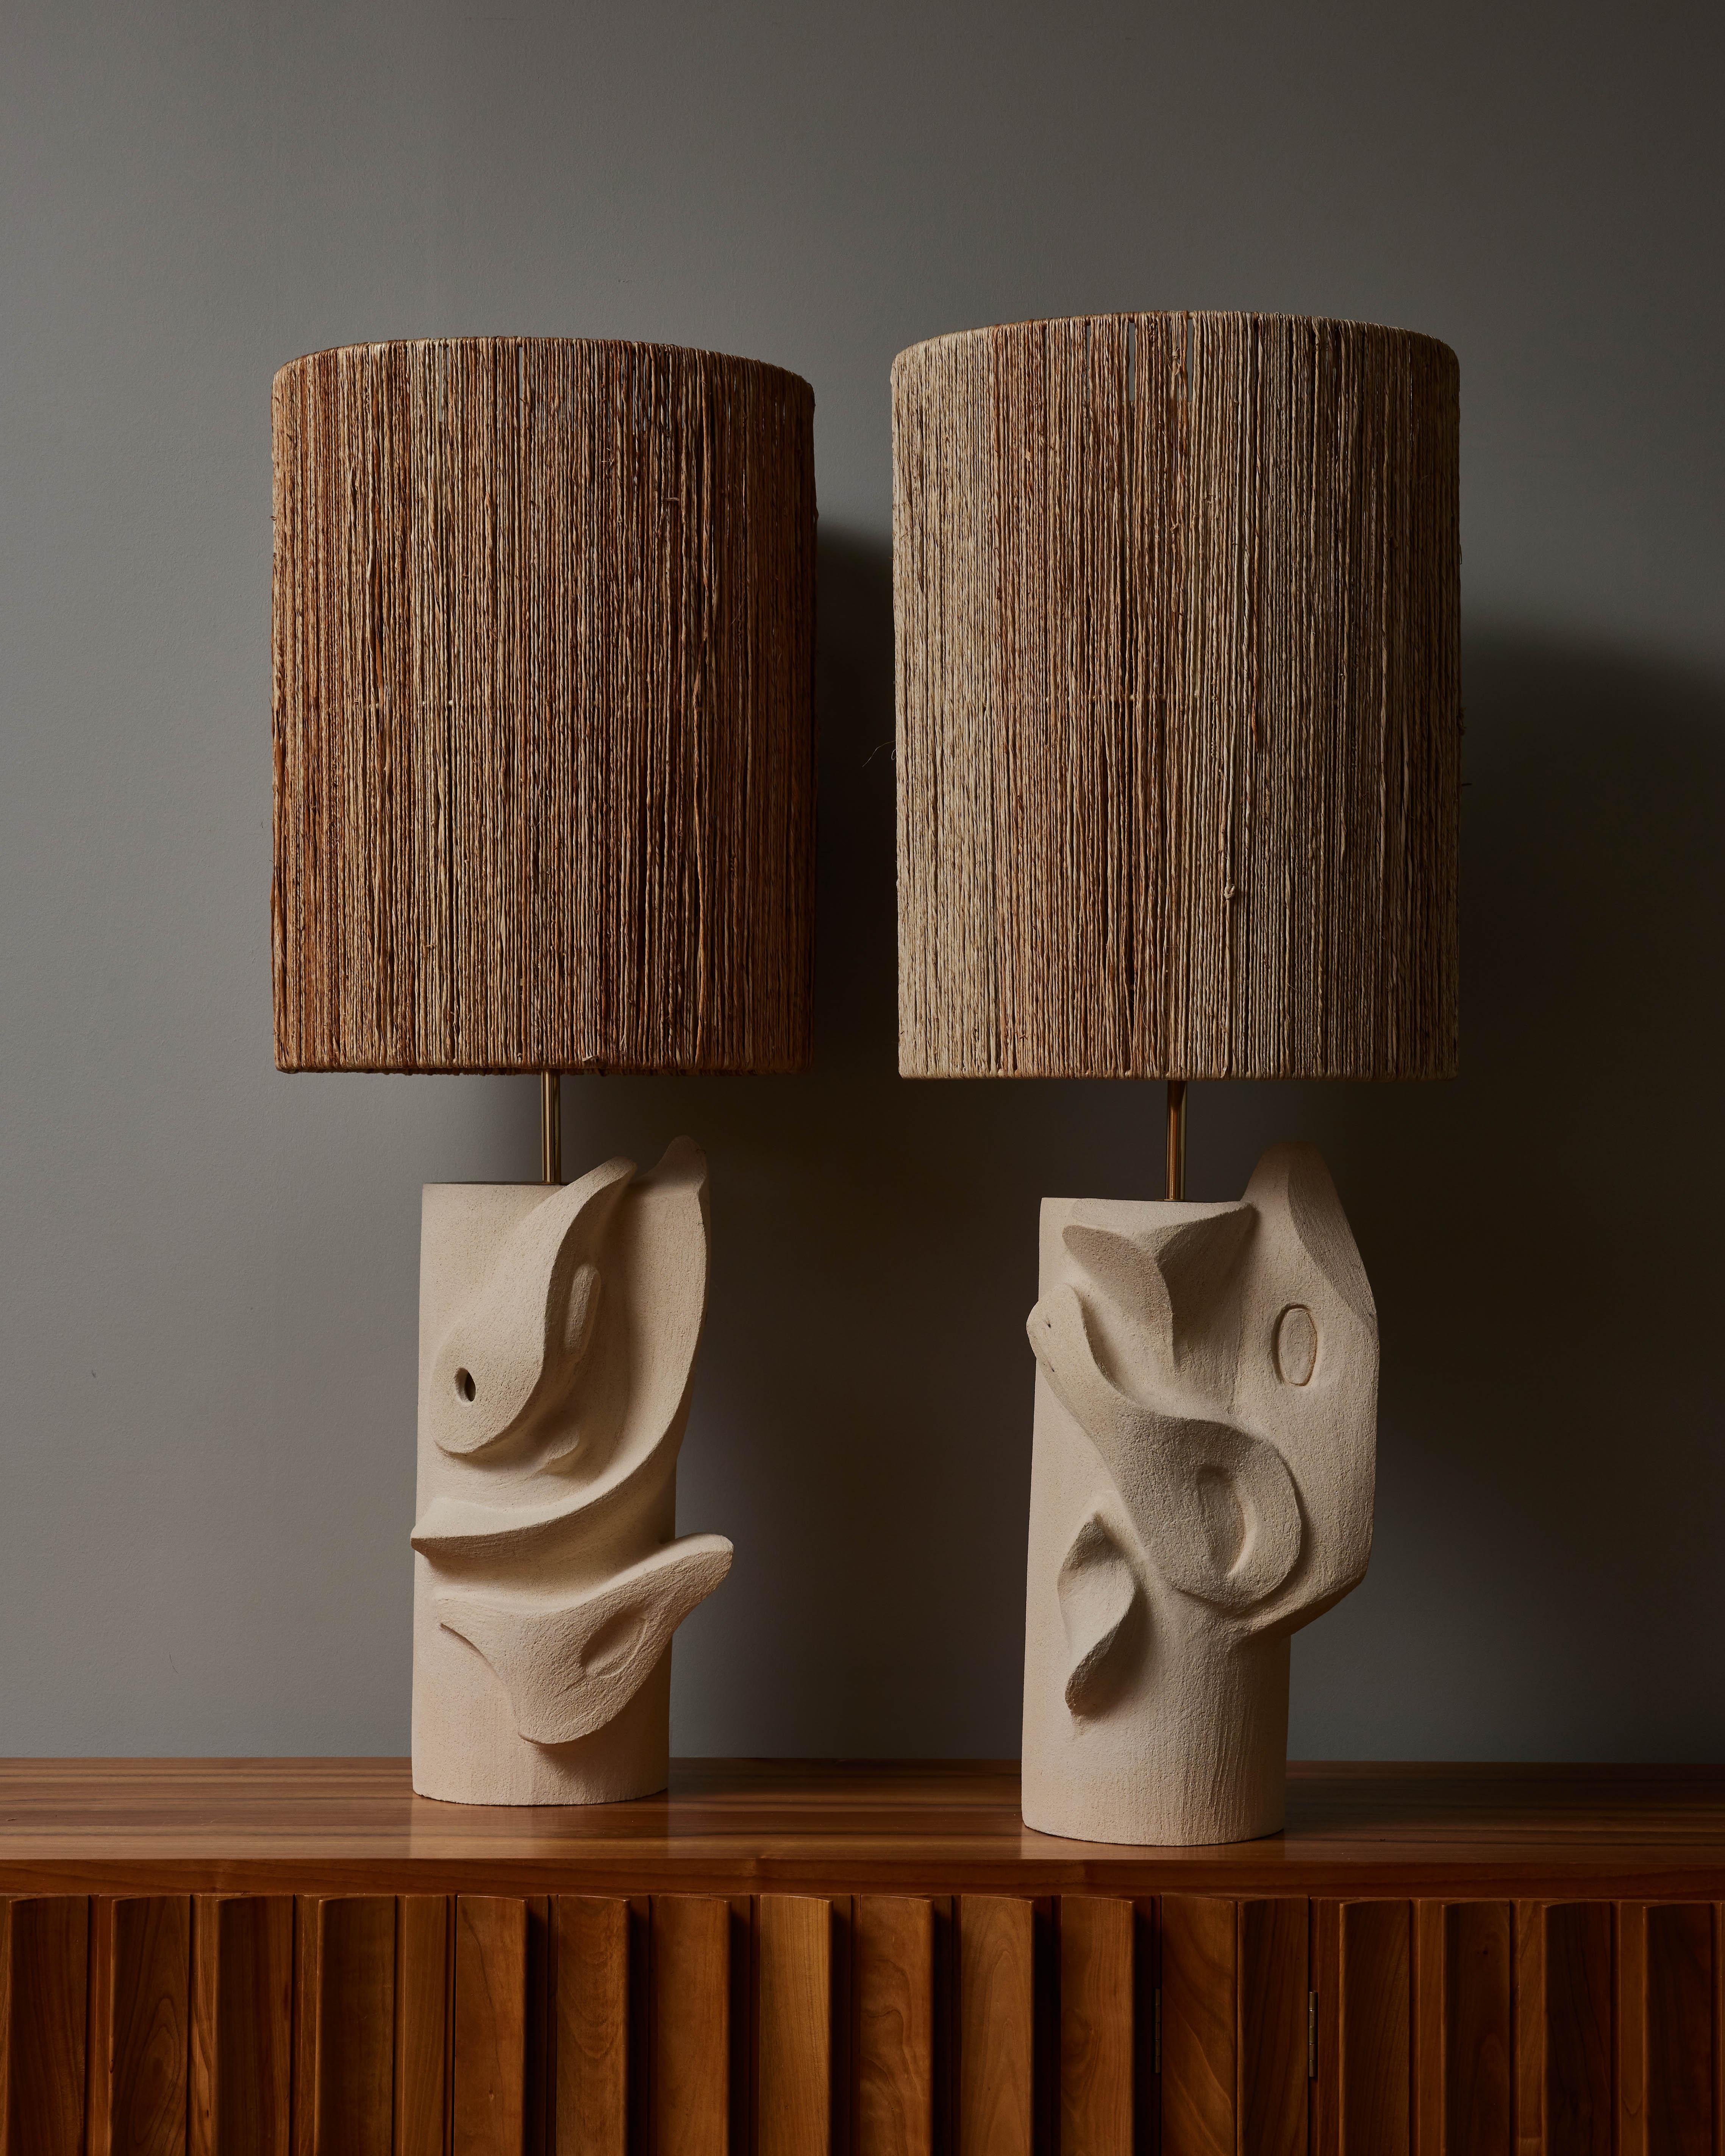 Pair of beautiful unglazed ceramic table lamps by the French artist Olivia Gognet


Since moving to Los Angeles in 2016, French artist and desi- gner Olivia Cognet has focused on ceramics as the fertile medium through which she expresses her